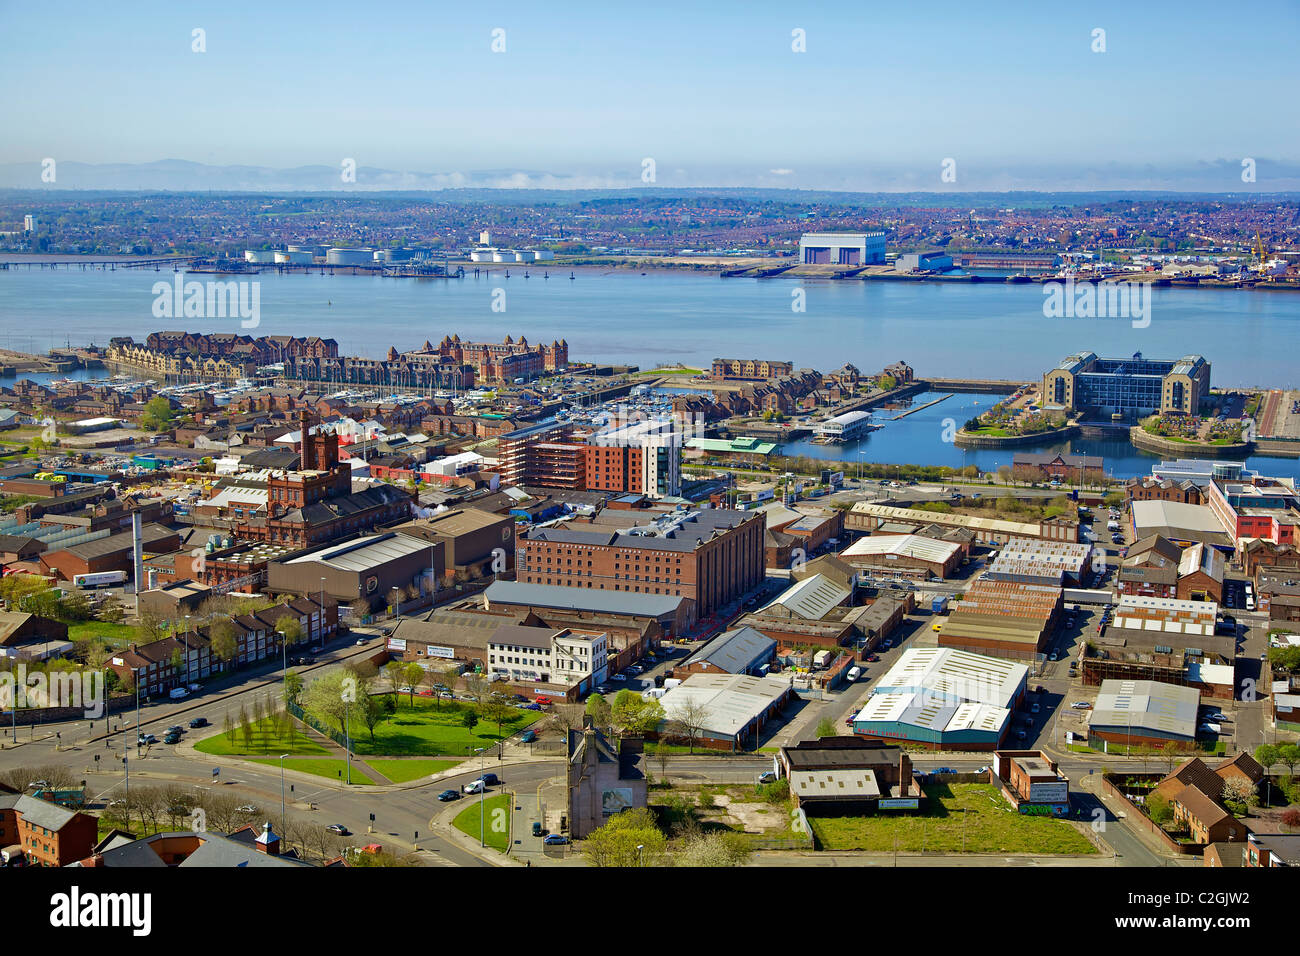 An aerial view of the city centre of Liverpool looking across the marina towards Camel Lairds. Stock Photo